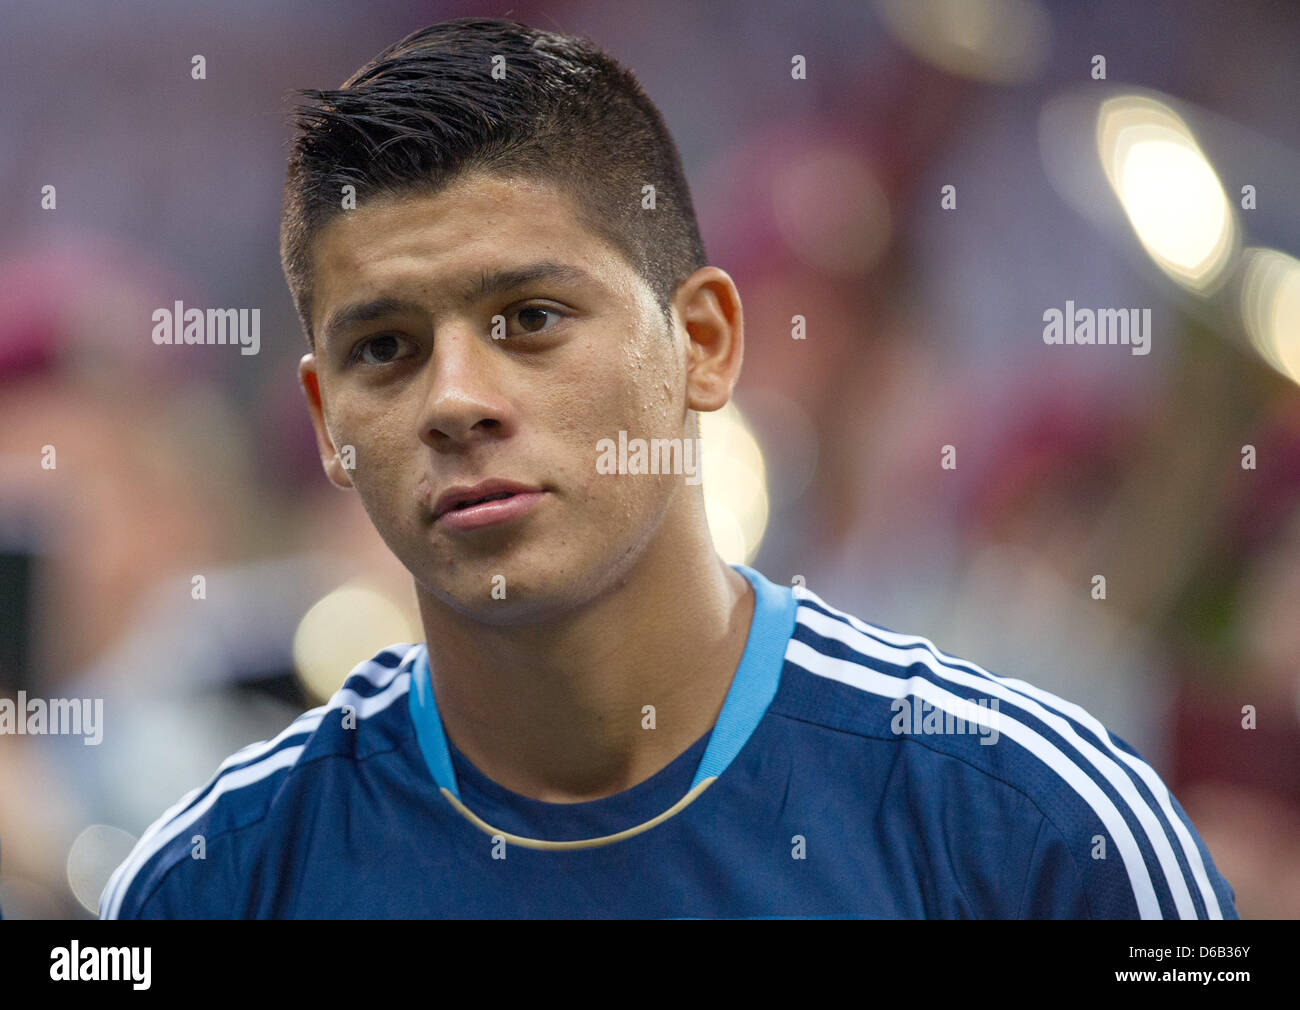 Argentina's Marcos Rojo during the friendly soccer match Germany against Argentina at the Commerzbank-Arena in Frankfurt/ Main, Germany, 15 August 2012. Photo: Uwe Anspach dpa/lhe Stock Photo